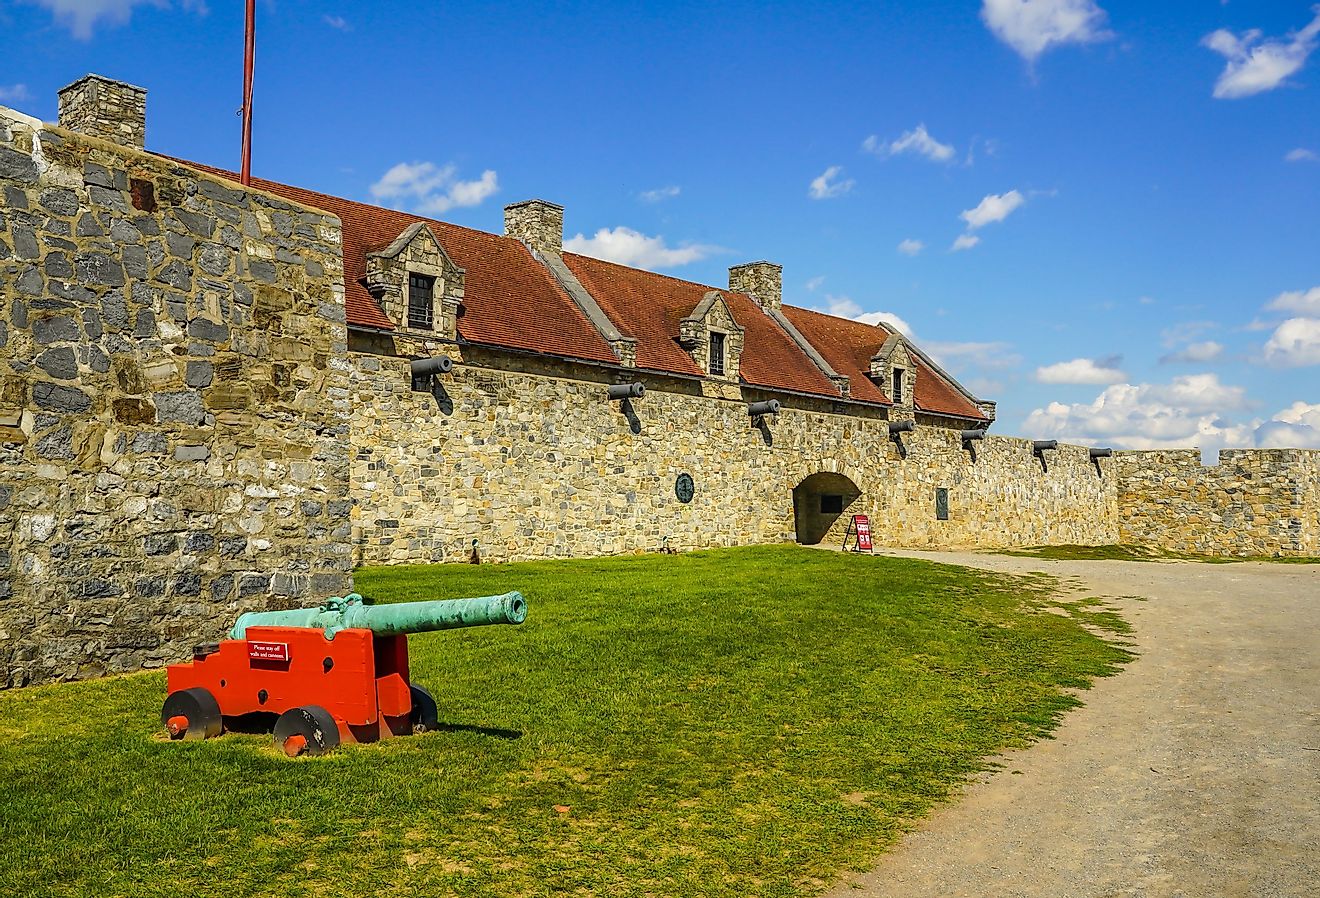 Exterior wall and cannon at the historic Fort Ticonderoga in Upstate New York.